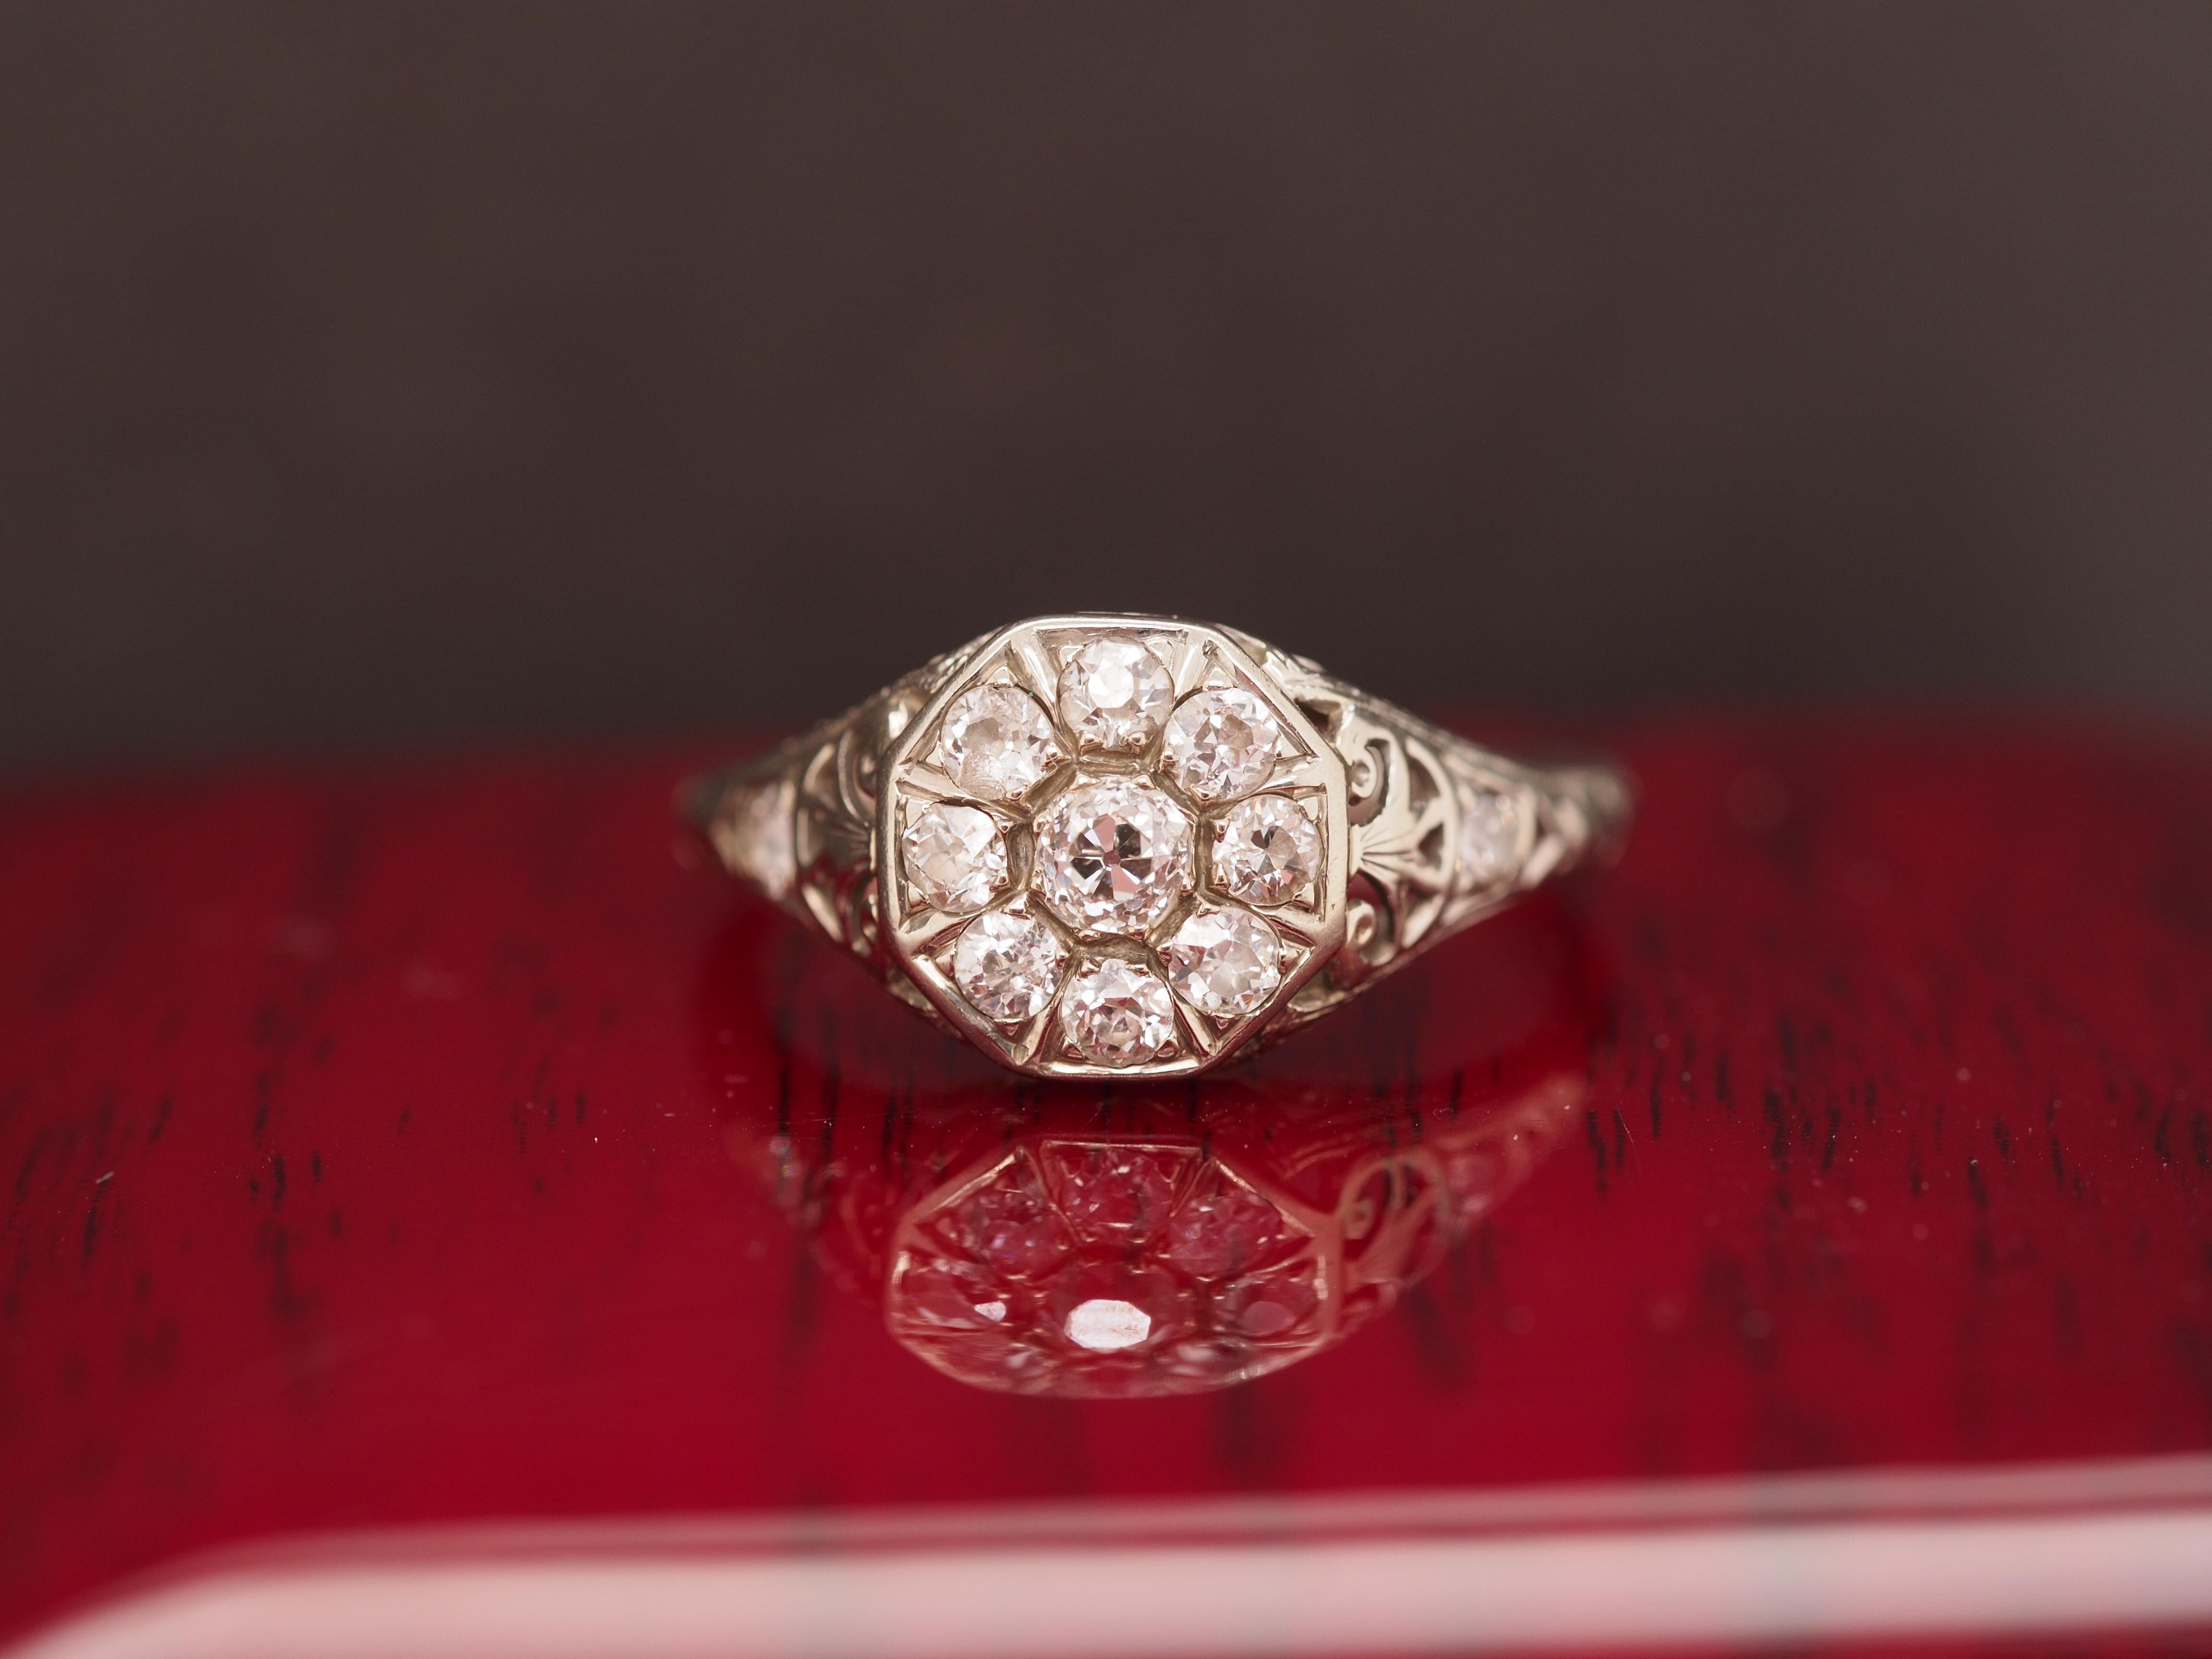 Year: 1910
Item Details:
Ring Size: 6.25
Metal Type: 18K White Gold & Platinum [Hallmarked, and Tested]
Weight: 2.6 grams
Diamond Details:
Weight: .75cttw
Cut: Old Mine Brilliant
Color: I-J
Clarity: SI
Band Width: 1.2 mm
Condition: Excellent